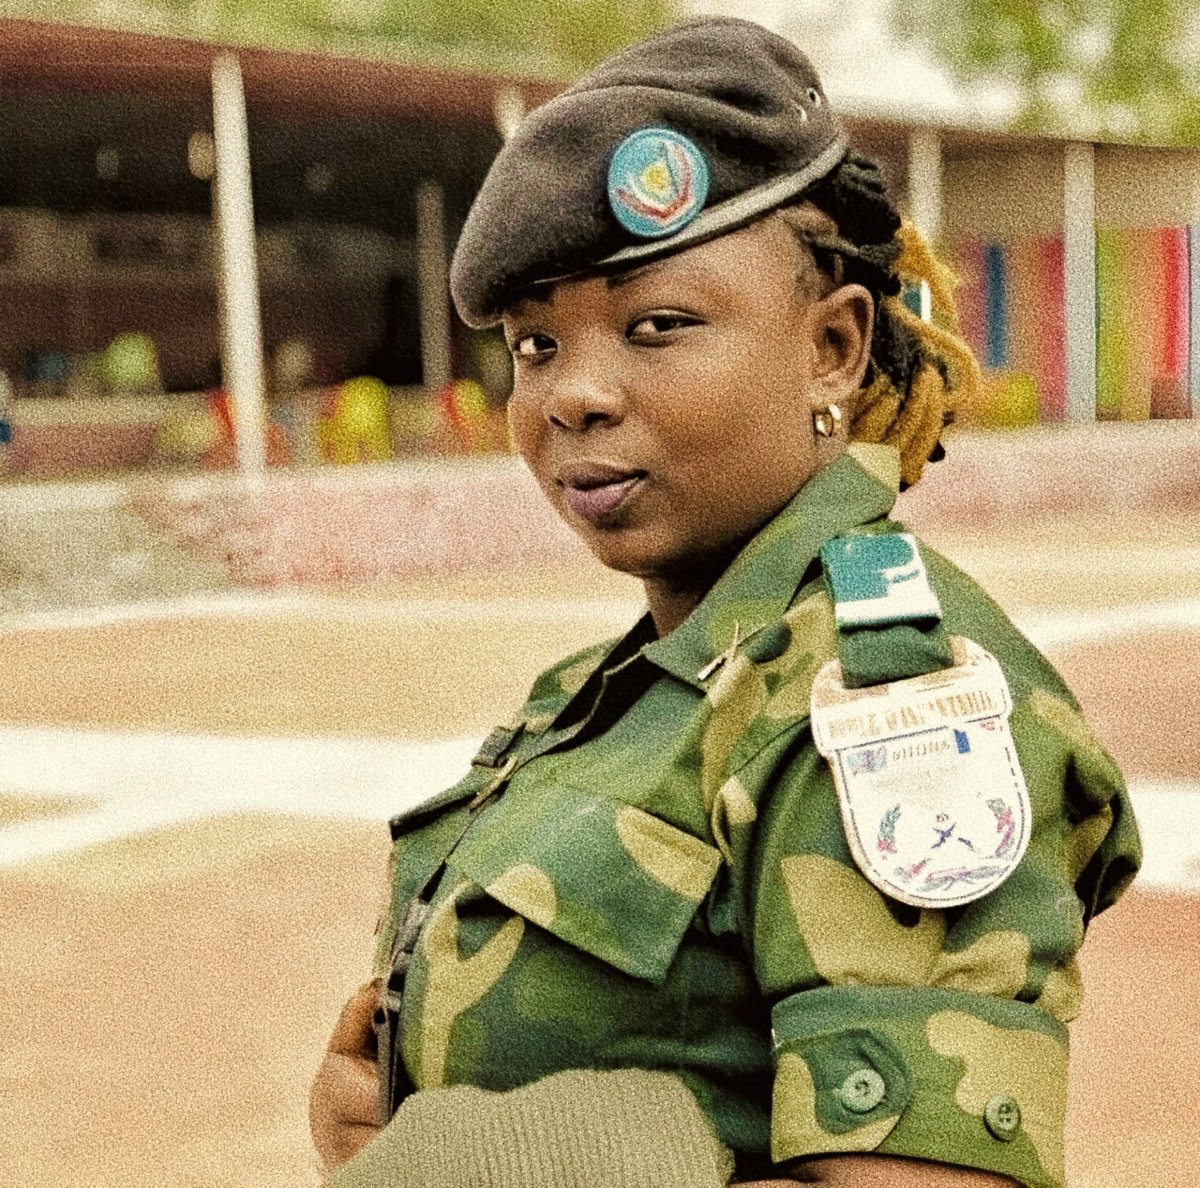 A lady officer from the FARDC proudly wearing the uniform. 🇨🇩

#congo #fardc #military #womensday2024 #kongo #fardcarchives #ponabendele🇨🇩